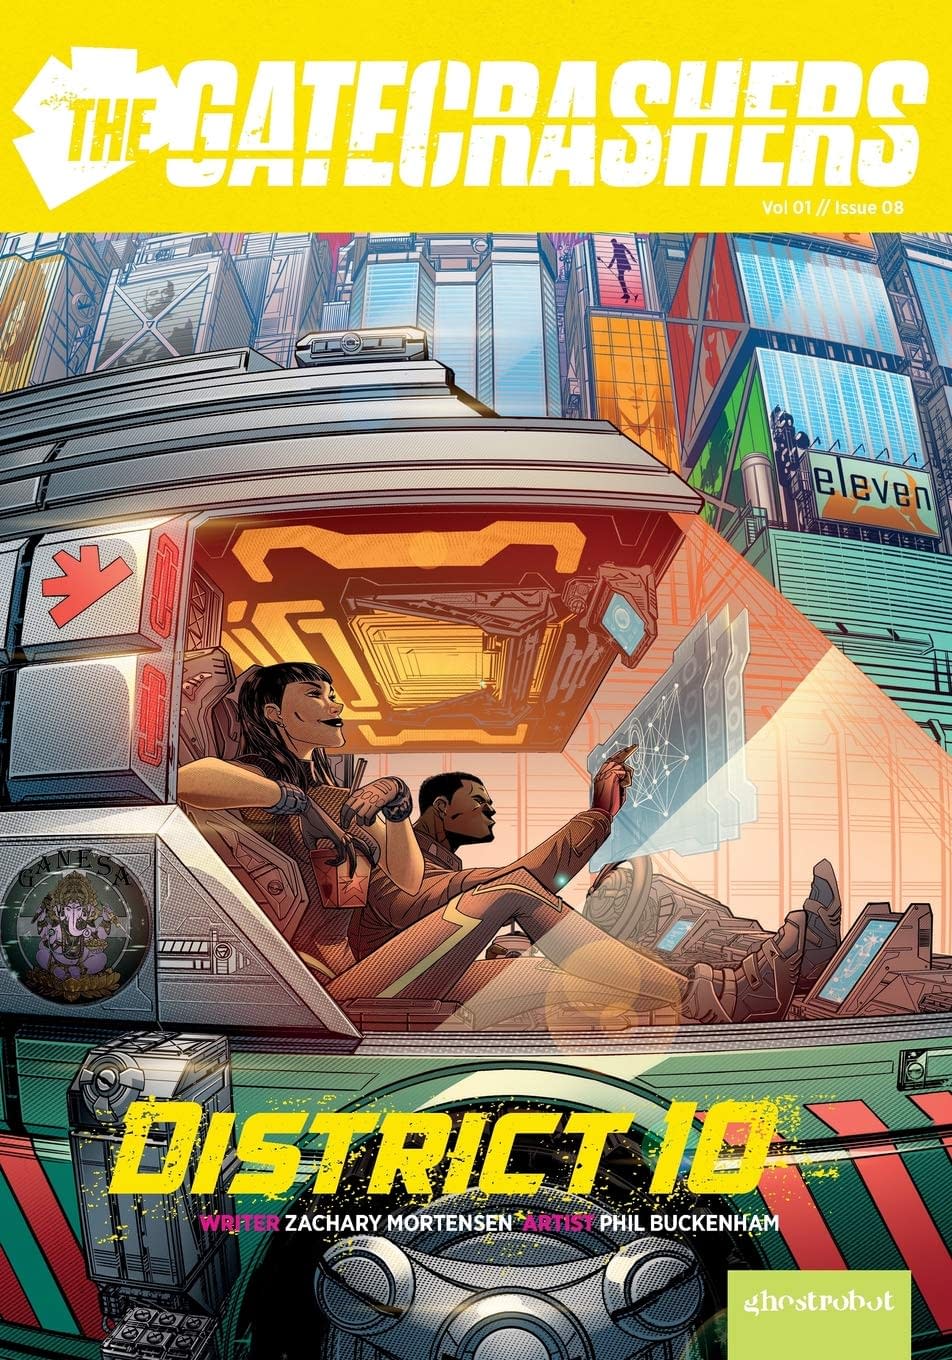 The Gatecrashers: Catching Up With the Cult Cyberpunk Indie Comic [Review]